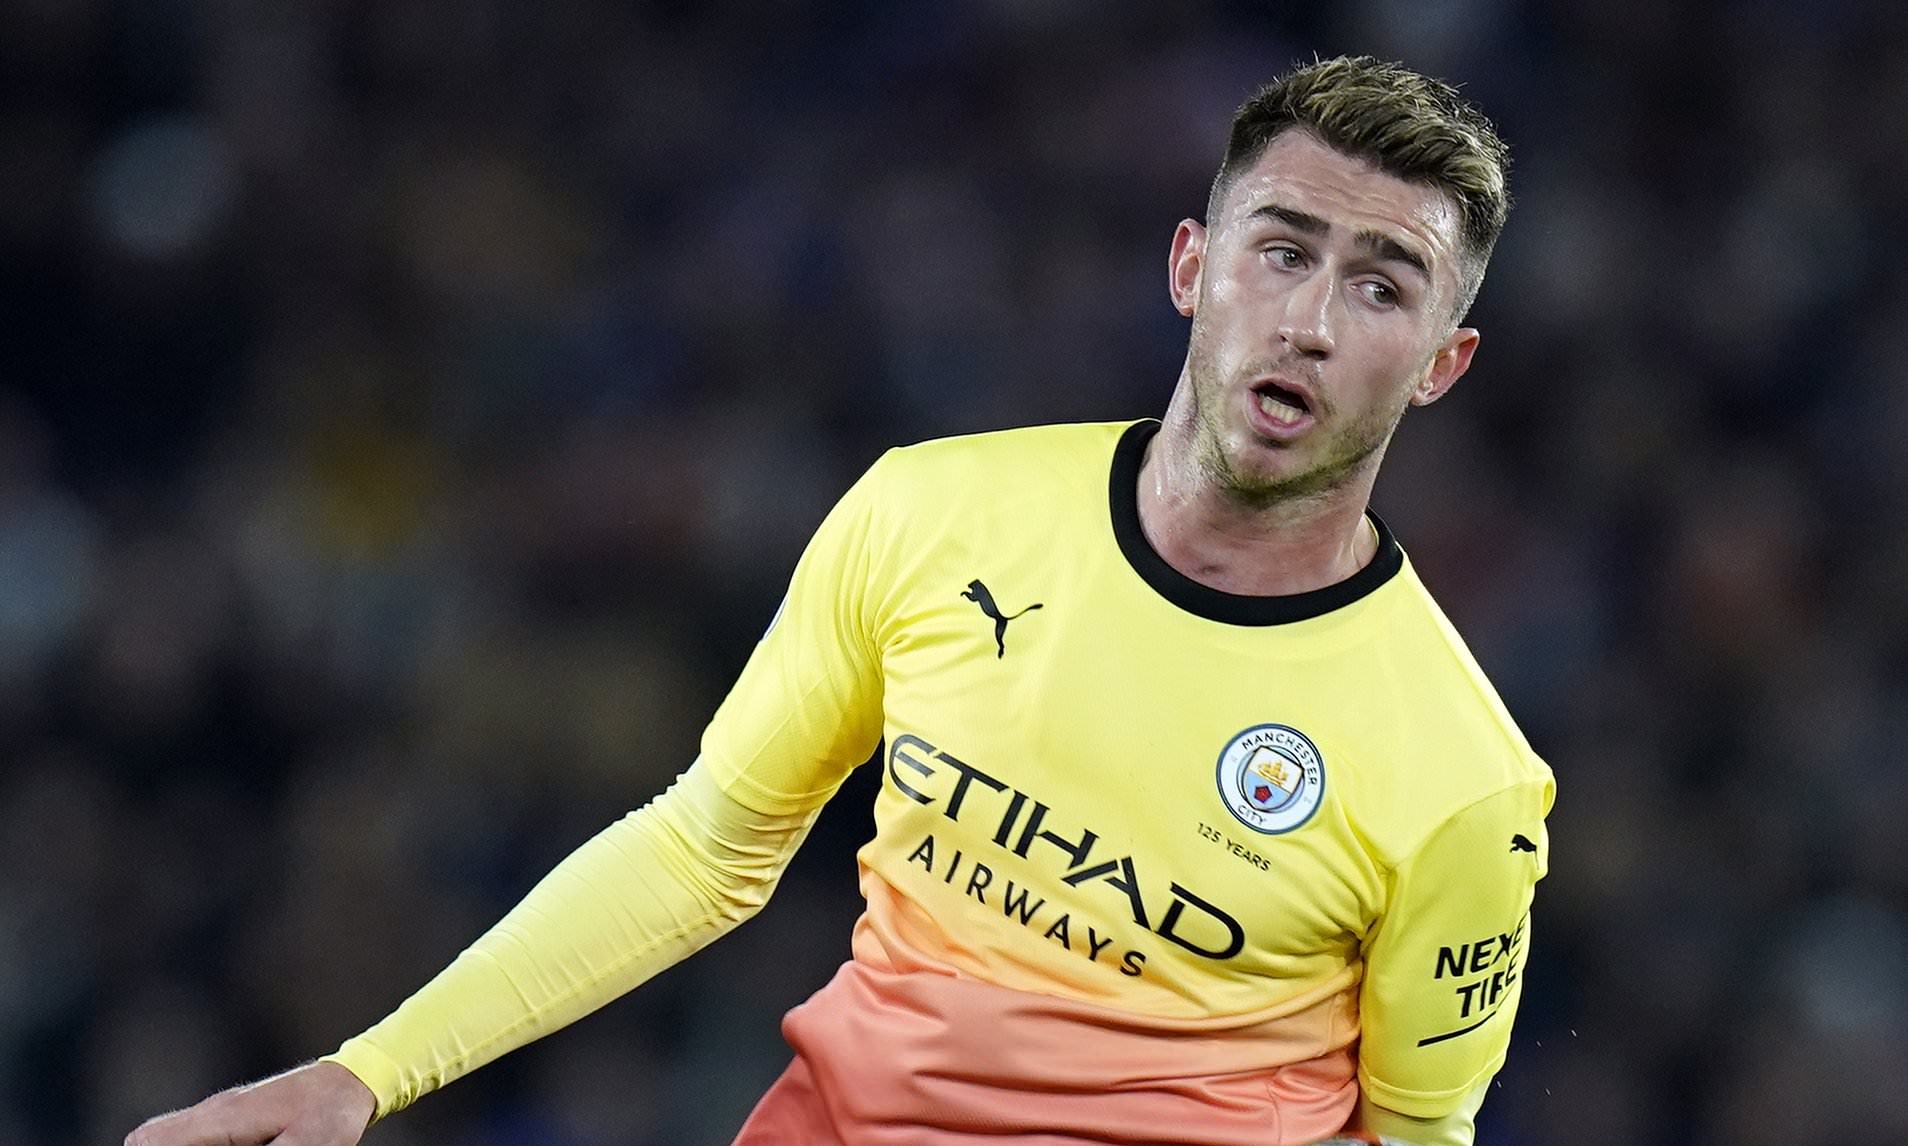 Who could Manchester City sign to partner Aymeric Laporte? Opinion